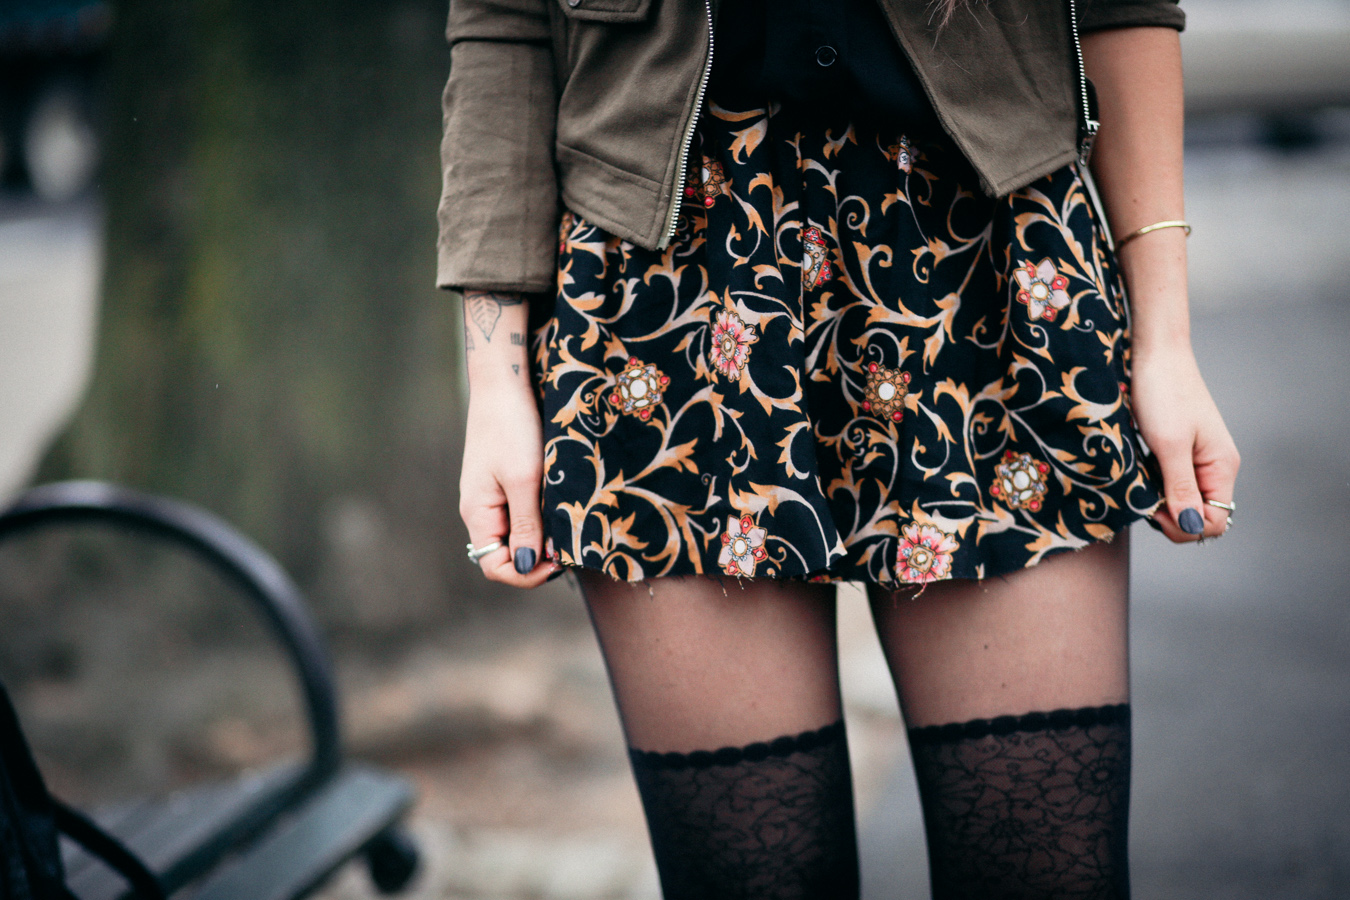 Le Happy wearing thigh high socks and floral mini skirt